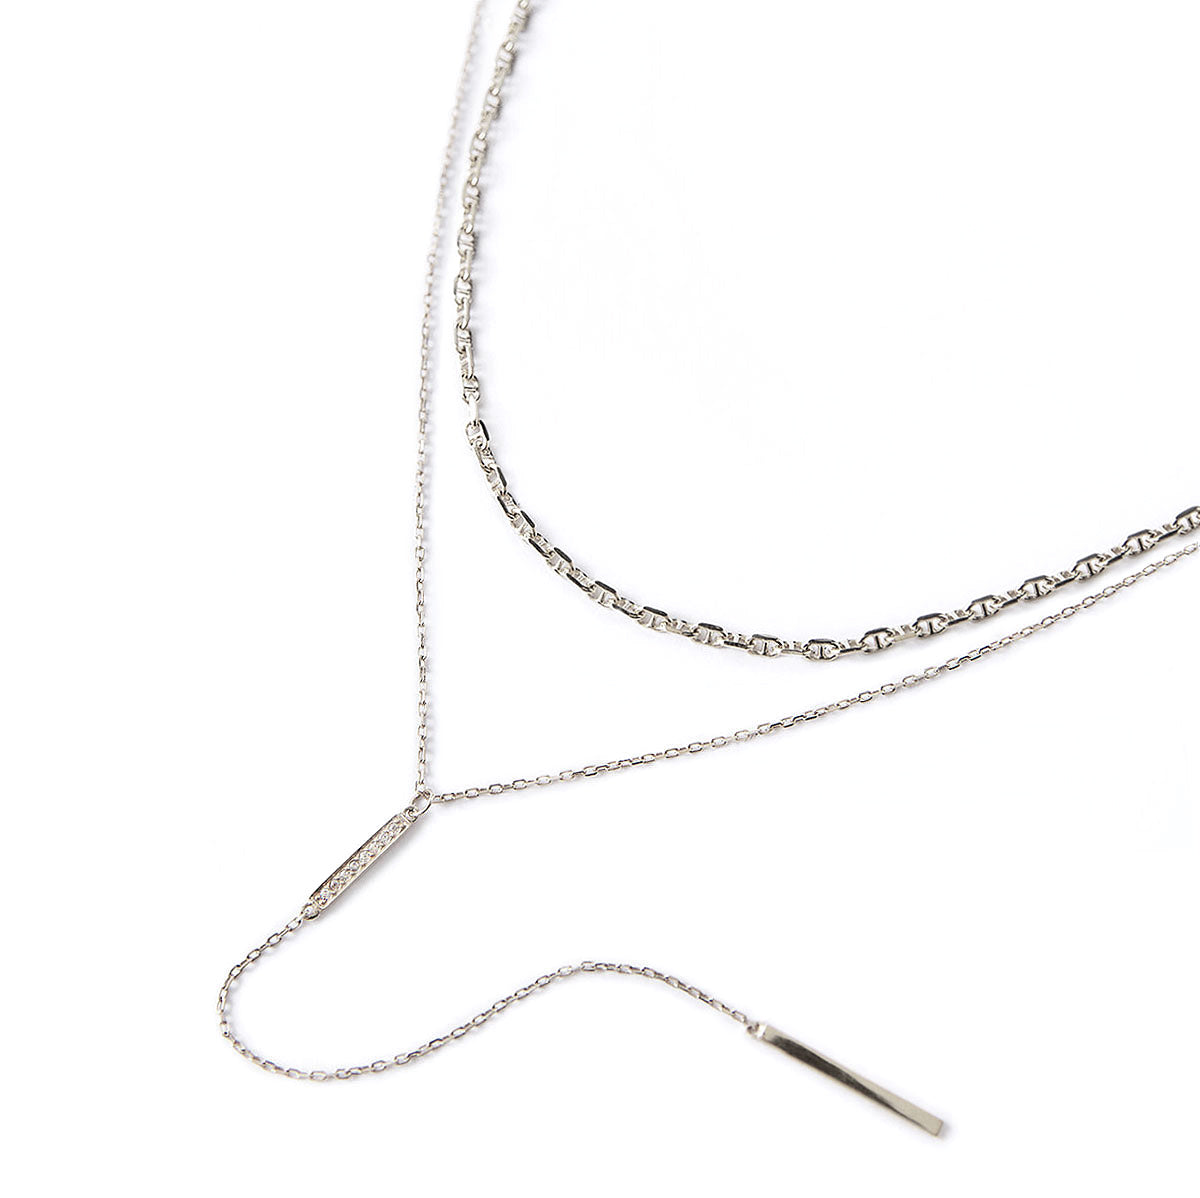 Silver Marina Chain and Bar Lariat Layered Necklace Duo